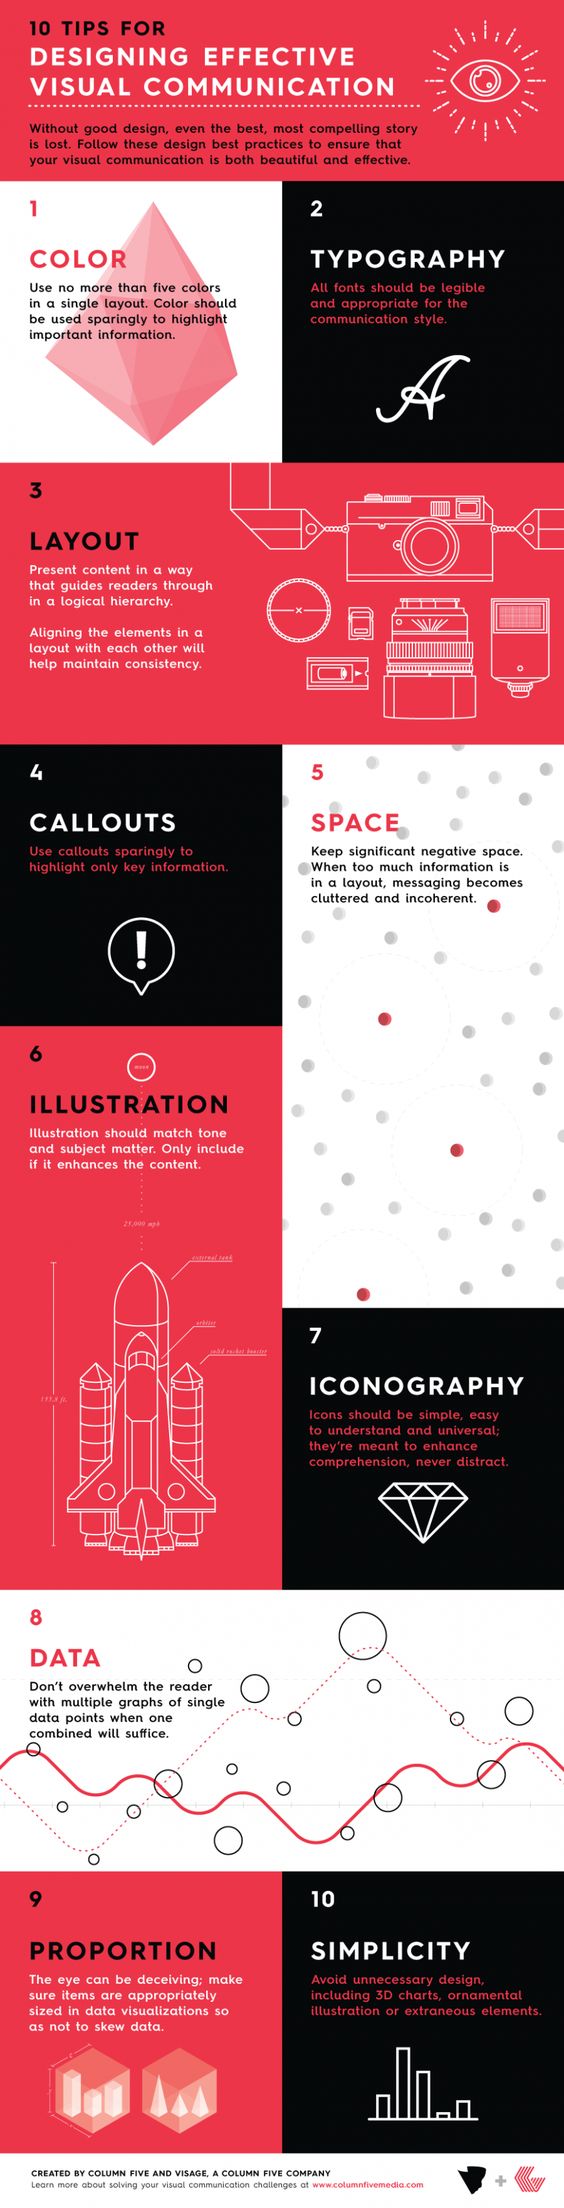 10 Tips for designing effective visual communication   infographic by Column Five via @Peg Fitzpatrick